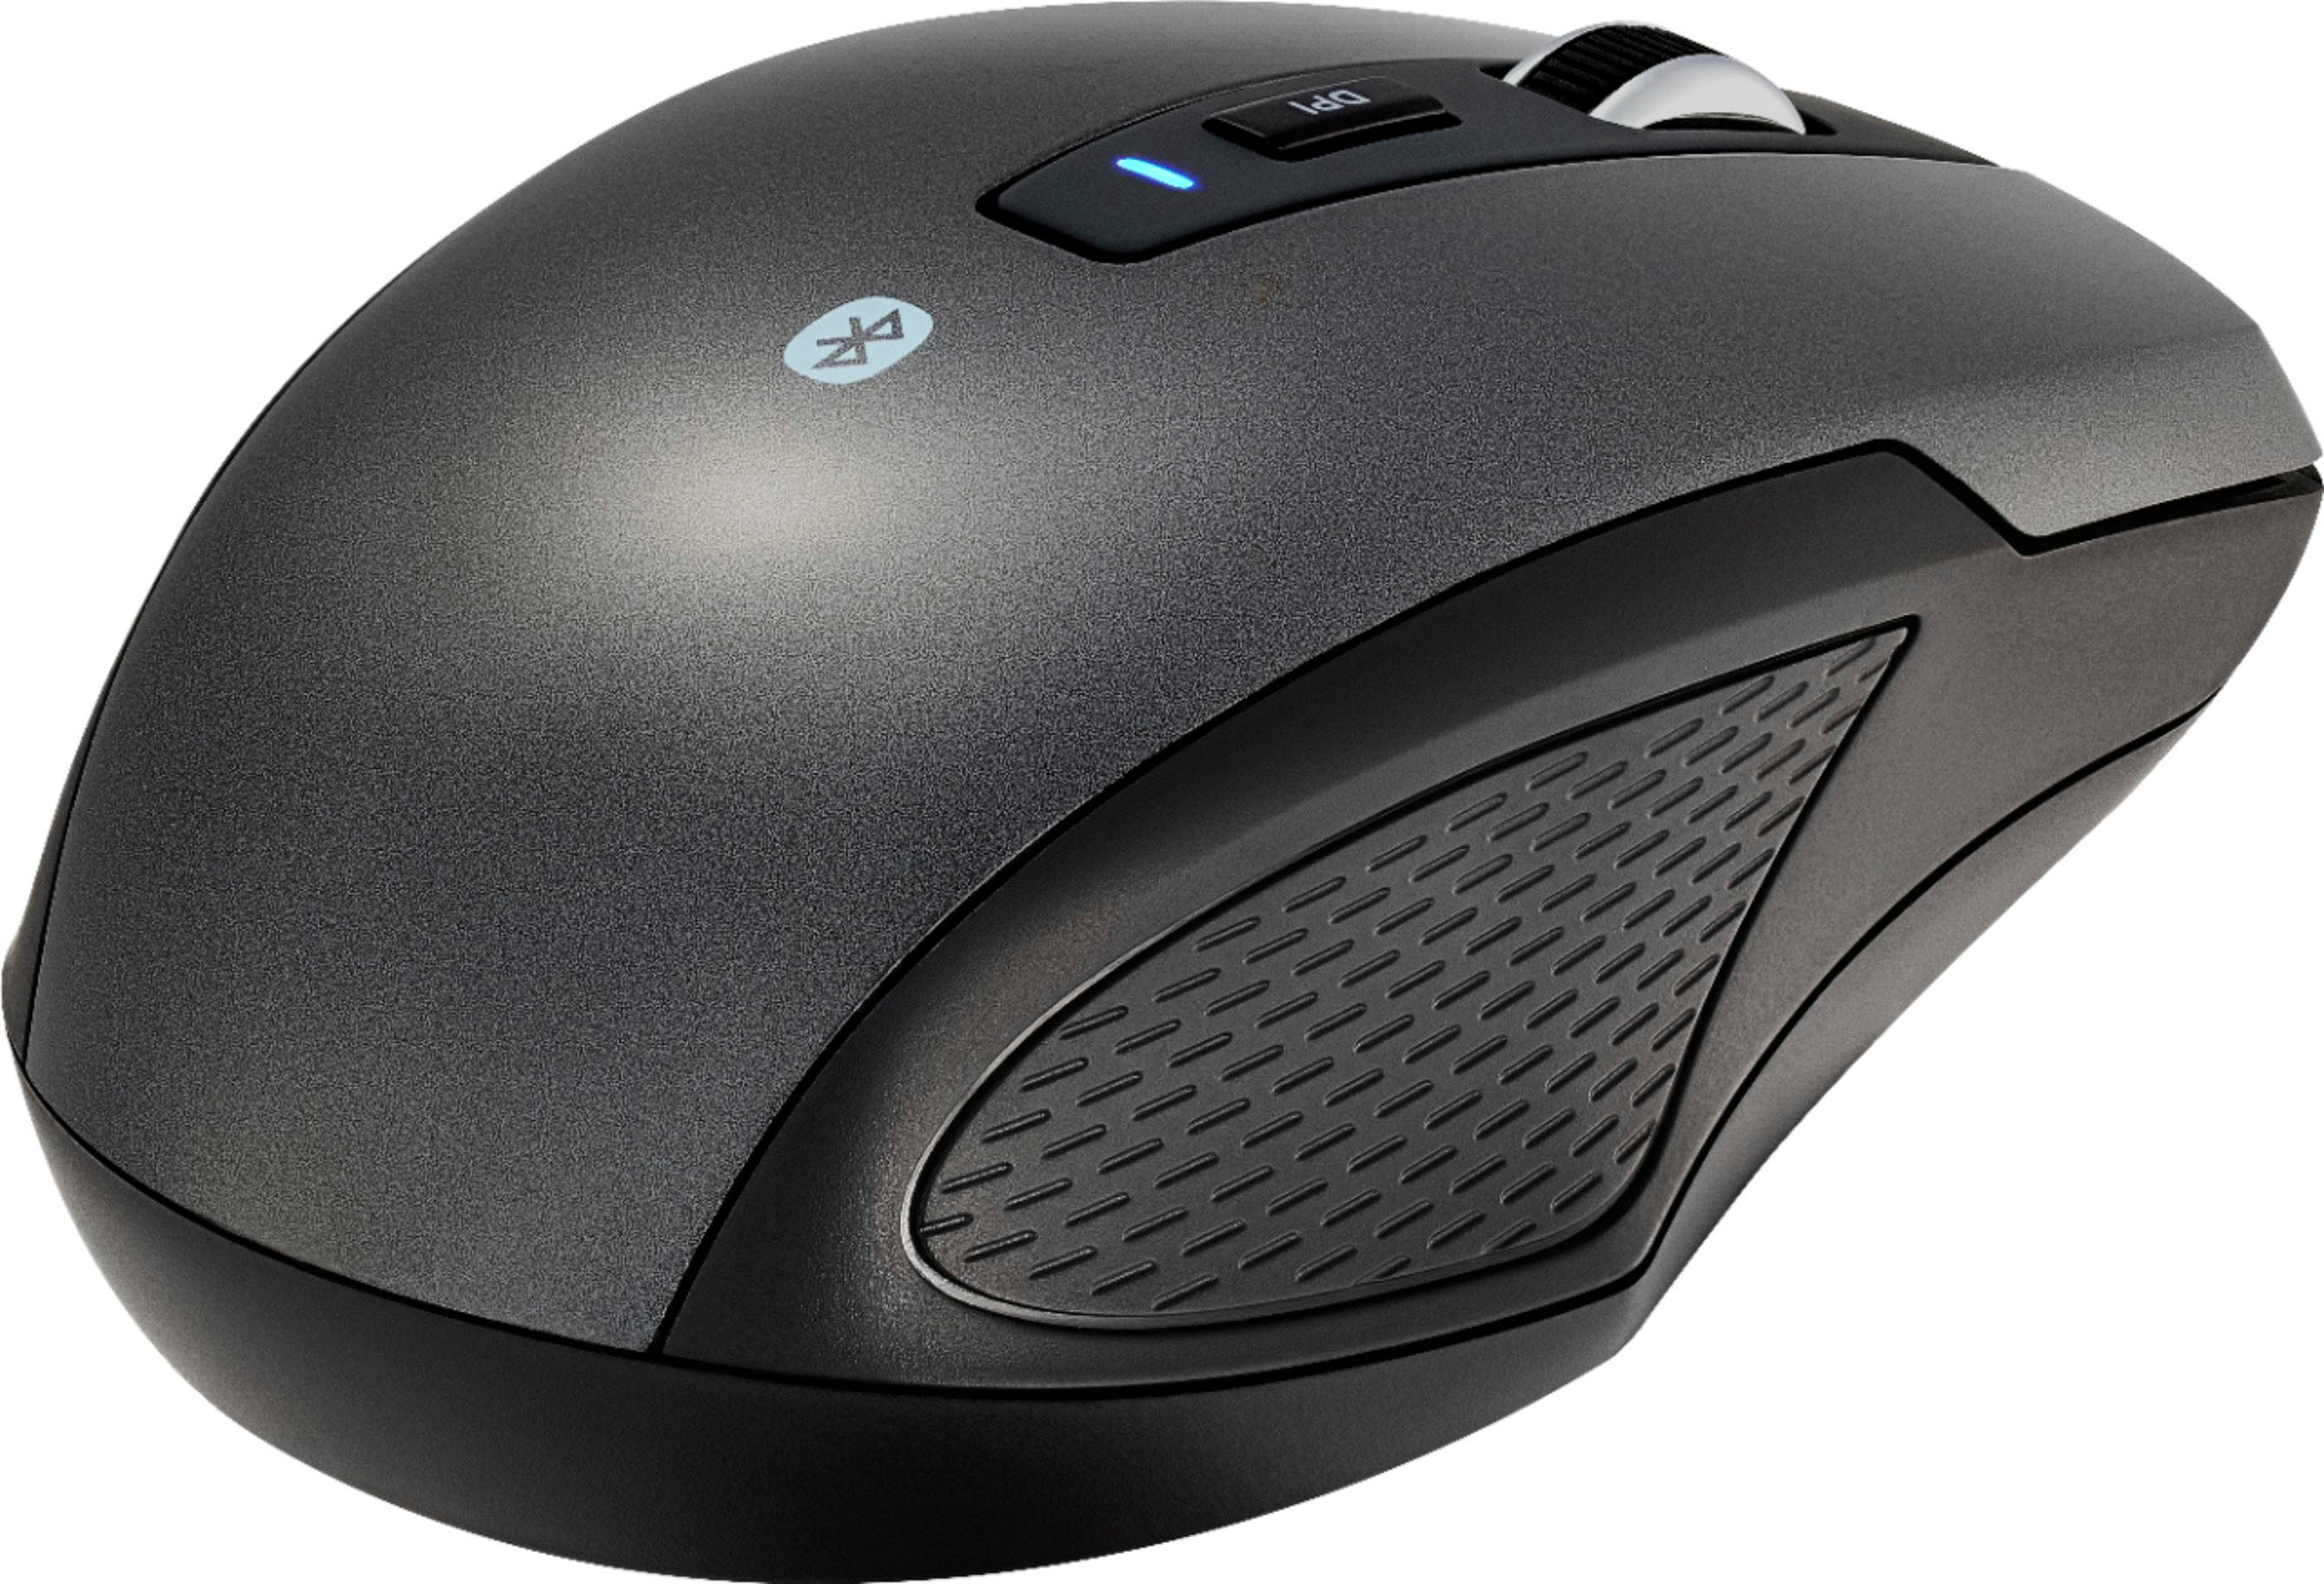 The Best Value Bluetooth Mouse (15$): Xiaomi Mouse Silent Edition, by  Otmane Fettal